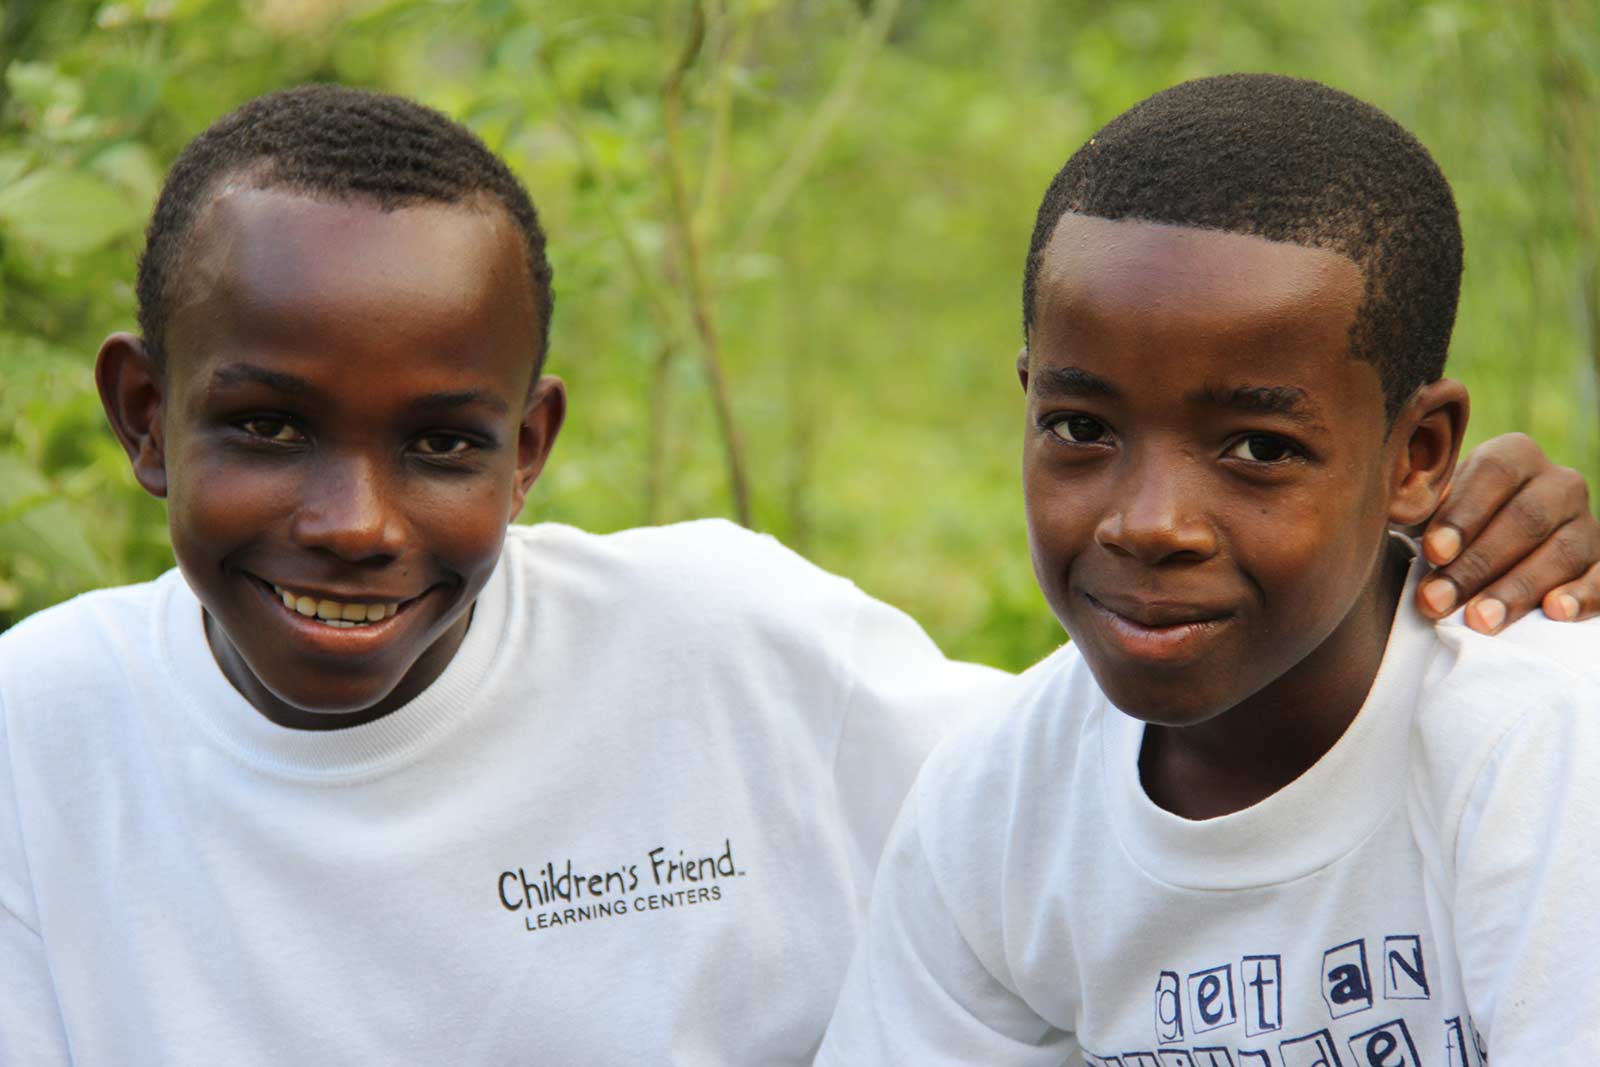 Haiti Health Initiative Photography (Children's Friend Learning Centers) - About Us